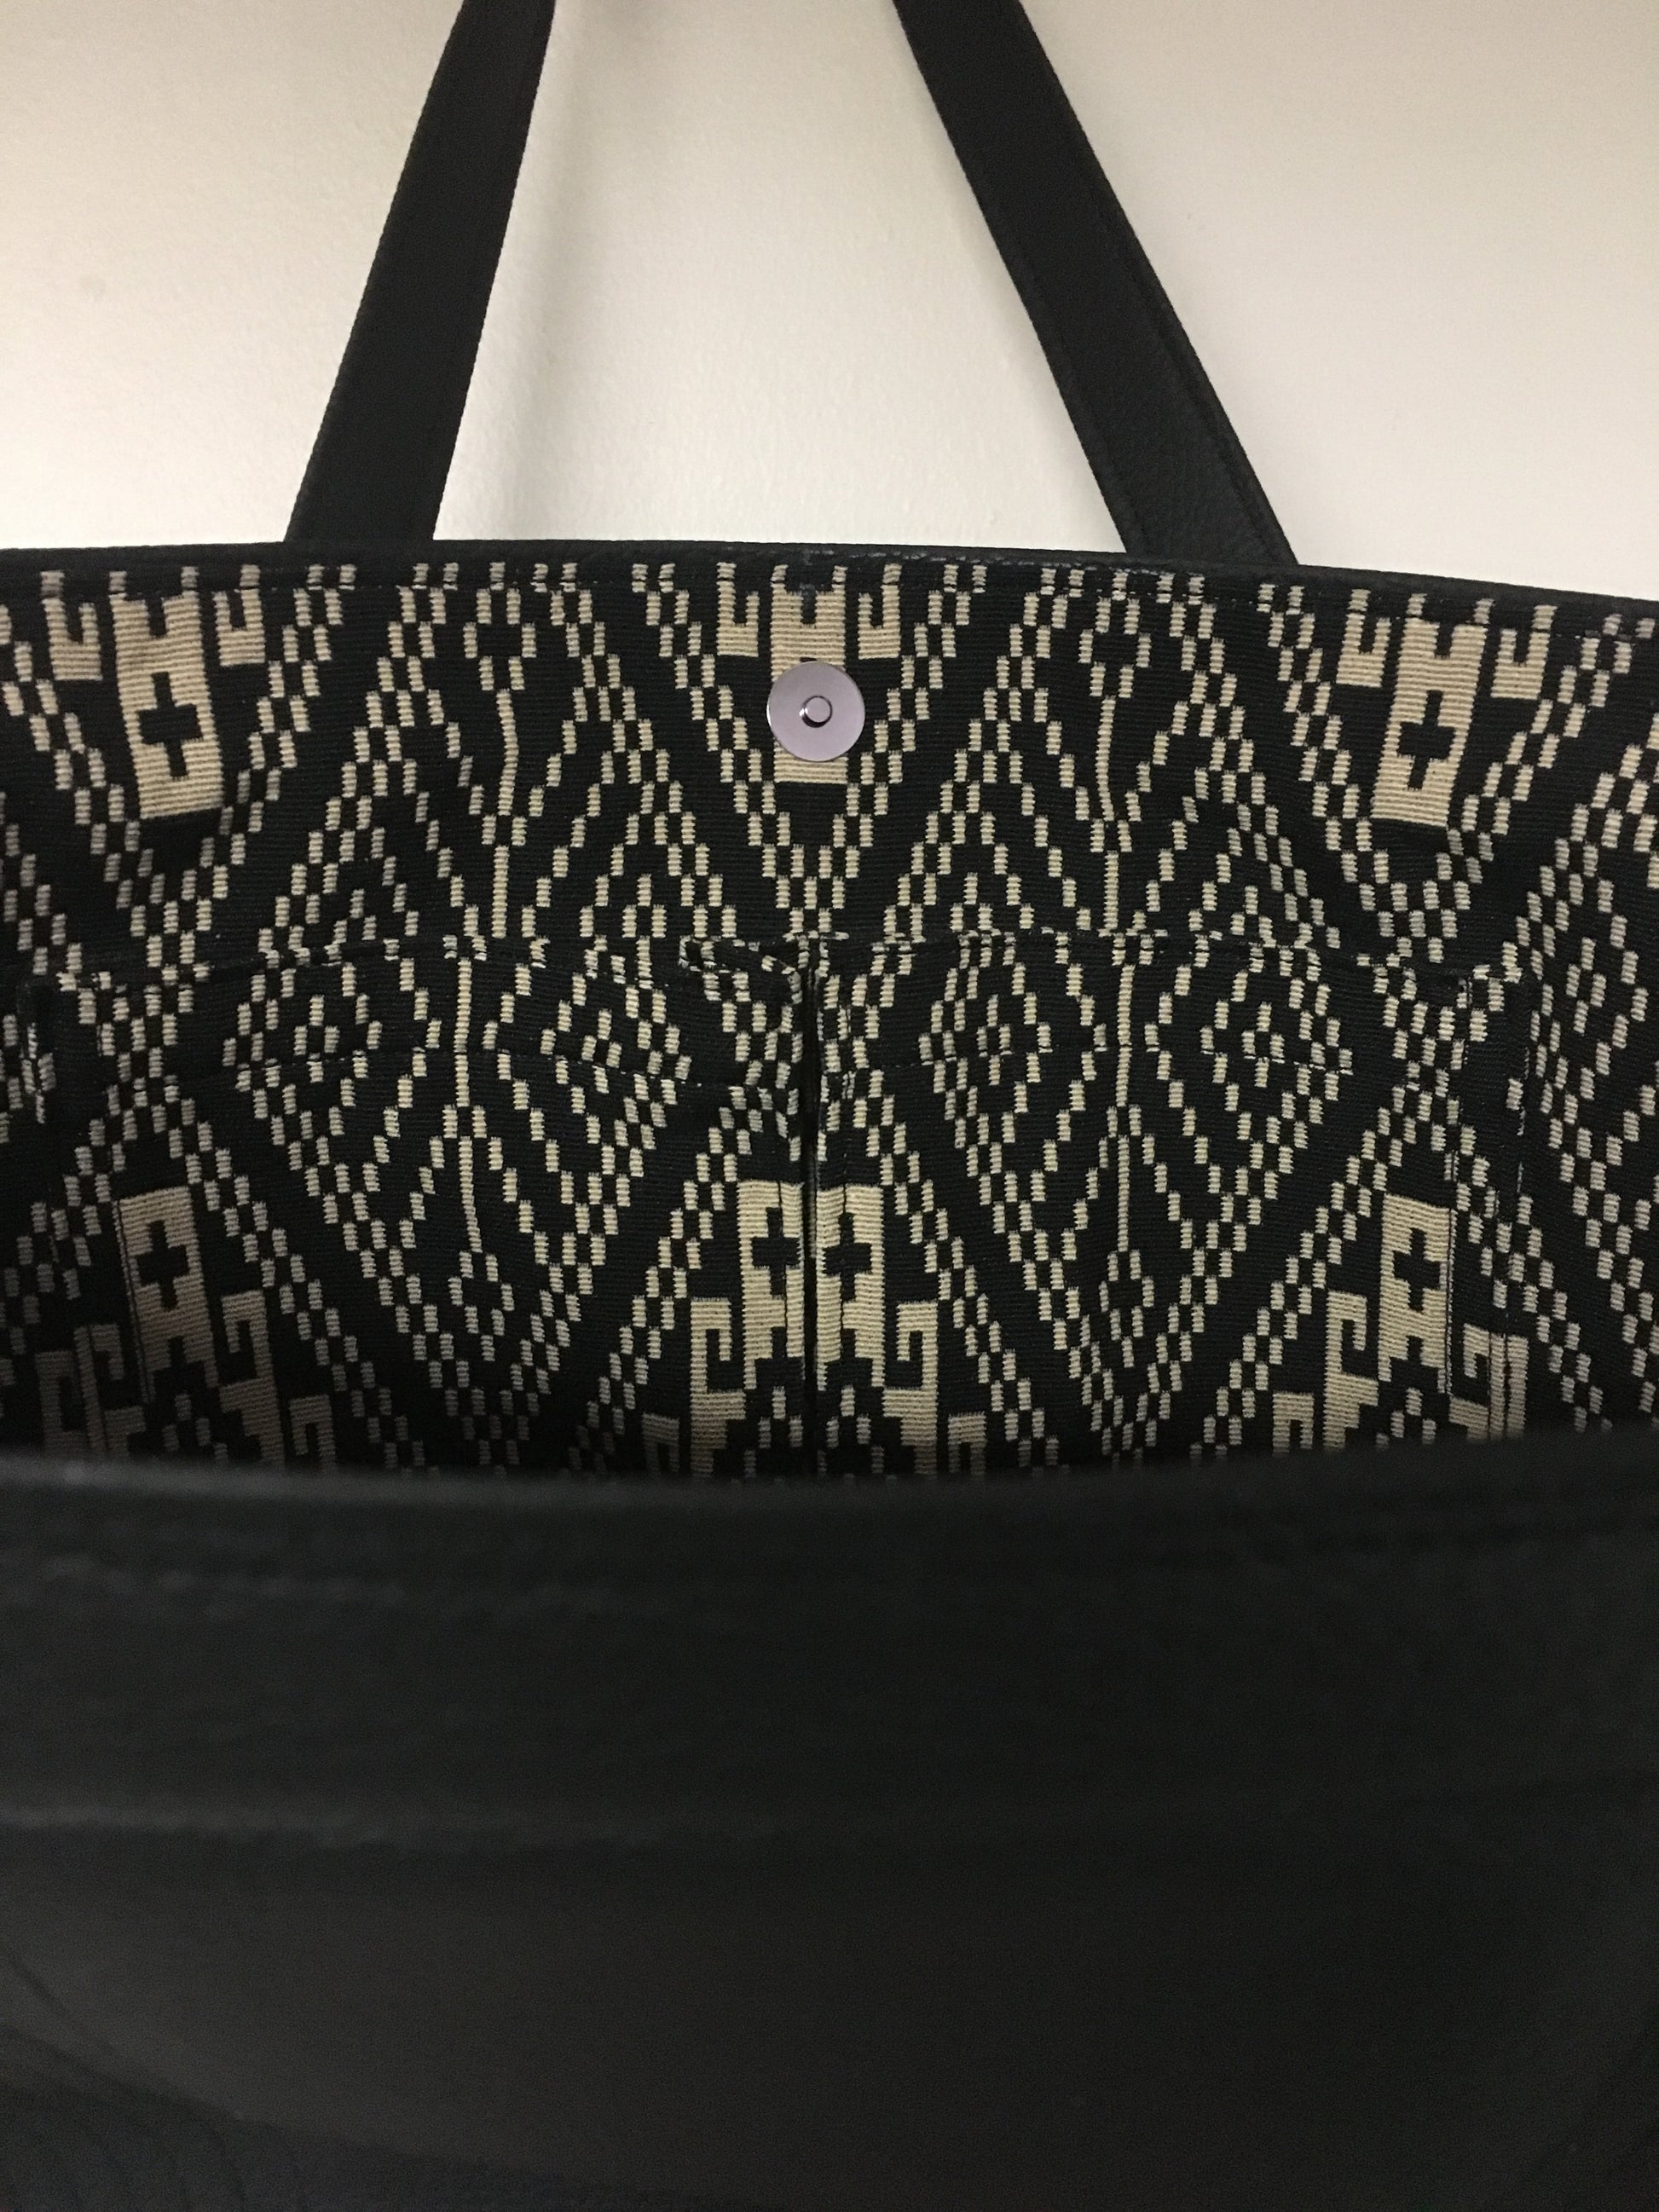 Open Tote with Mercury Style Pleating in Limited Edition Pebble Black Vinyl Lined with Aztec Print Lining. Measuring 15” across bottom (19” across top) x 10” x 5” (38 cm At Bottom / 48.25 cm At Top x 25.5 cm Tall x 12.5 cm Wide) and 24” (61cm) Straps. An open divided pocket and zipper pocket with hidden serial number and signature J.T. Christensen Label.